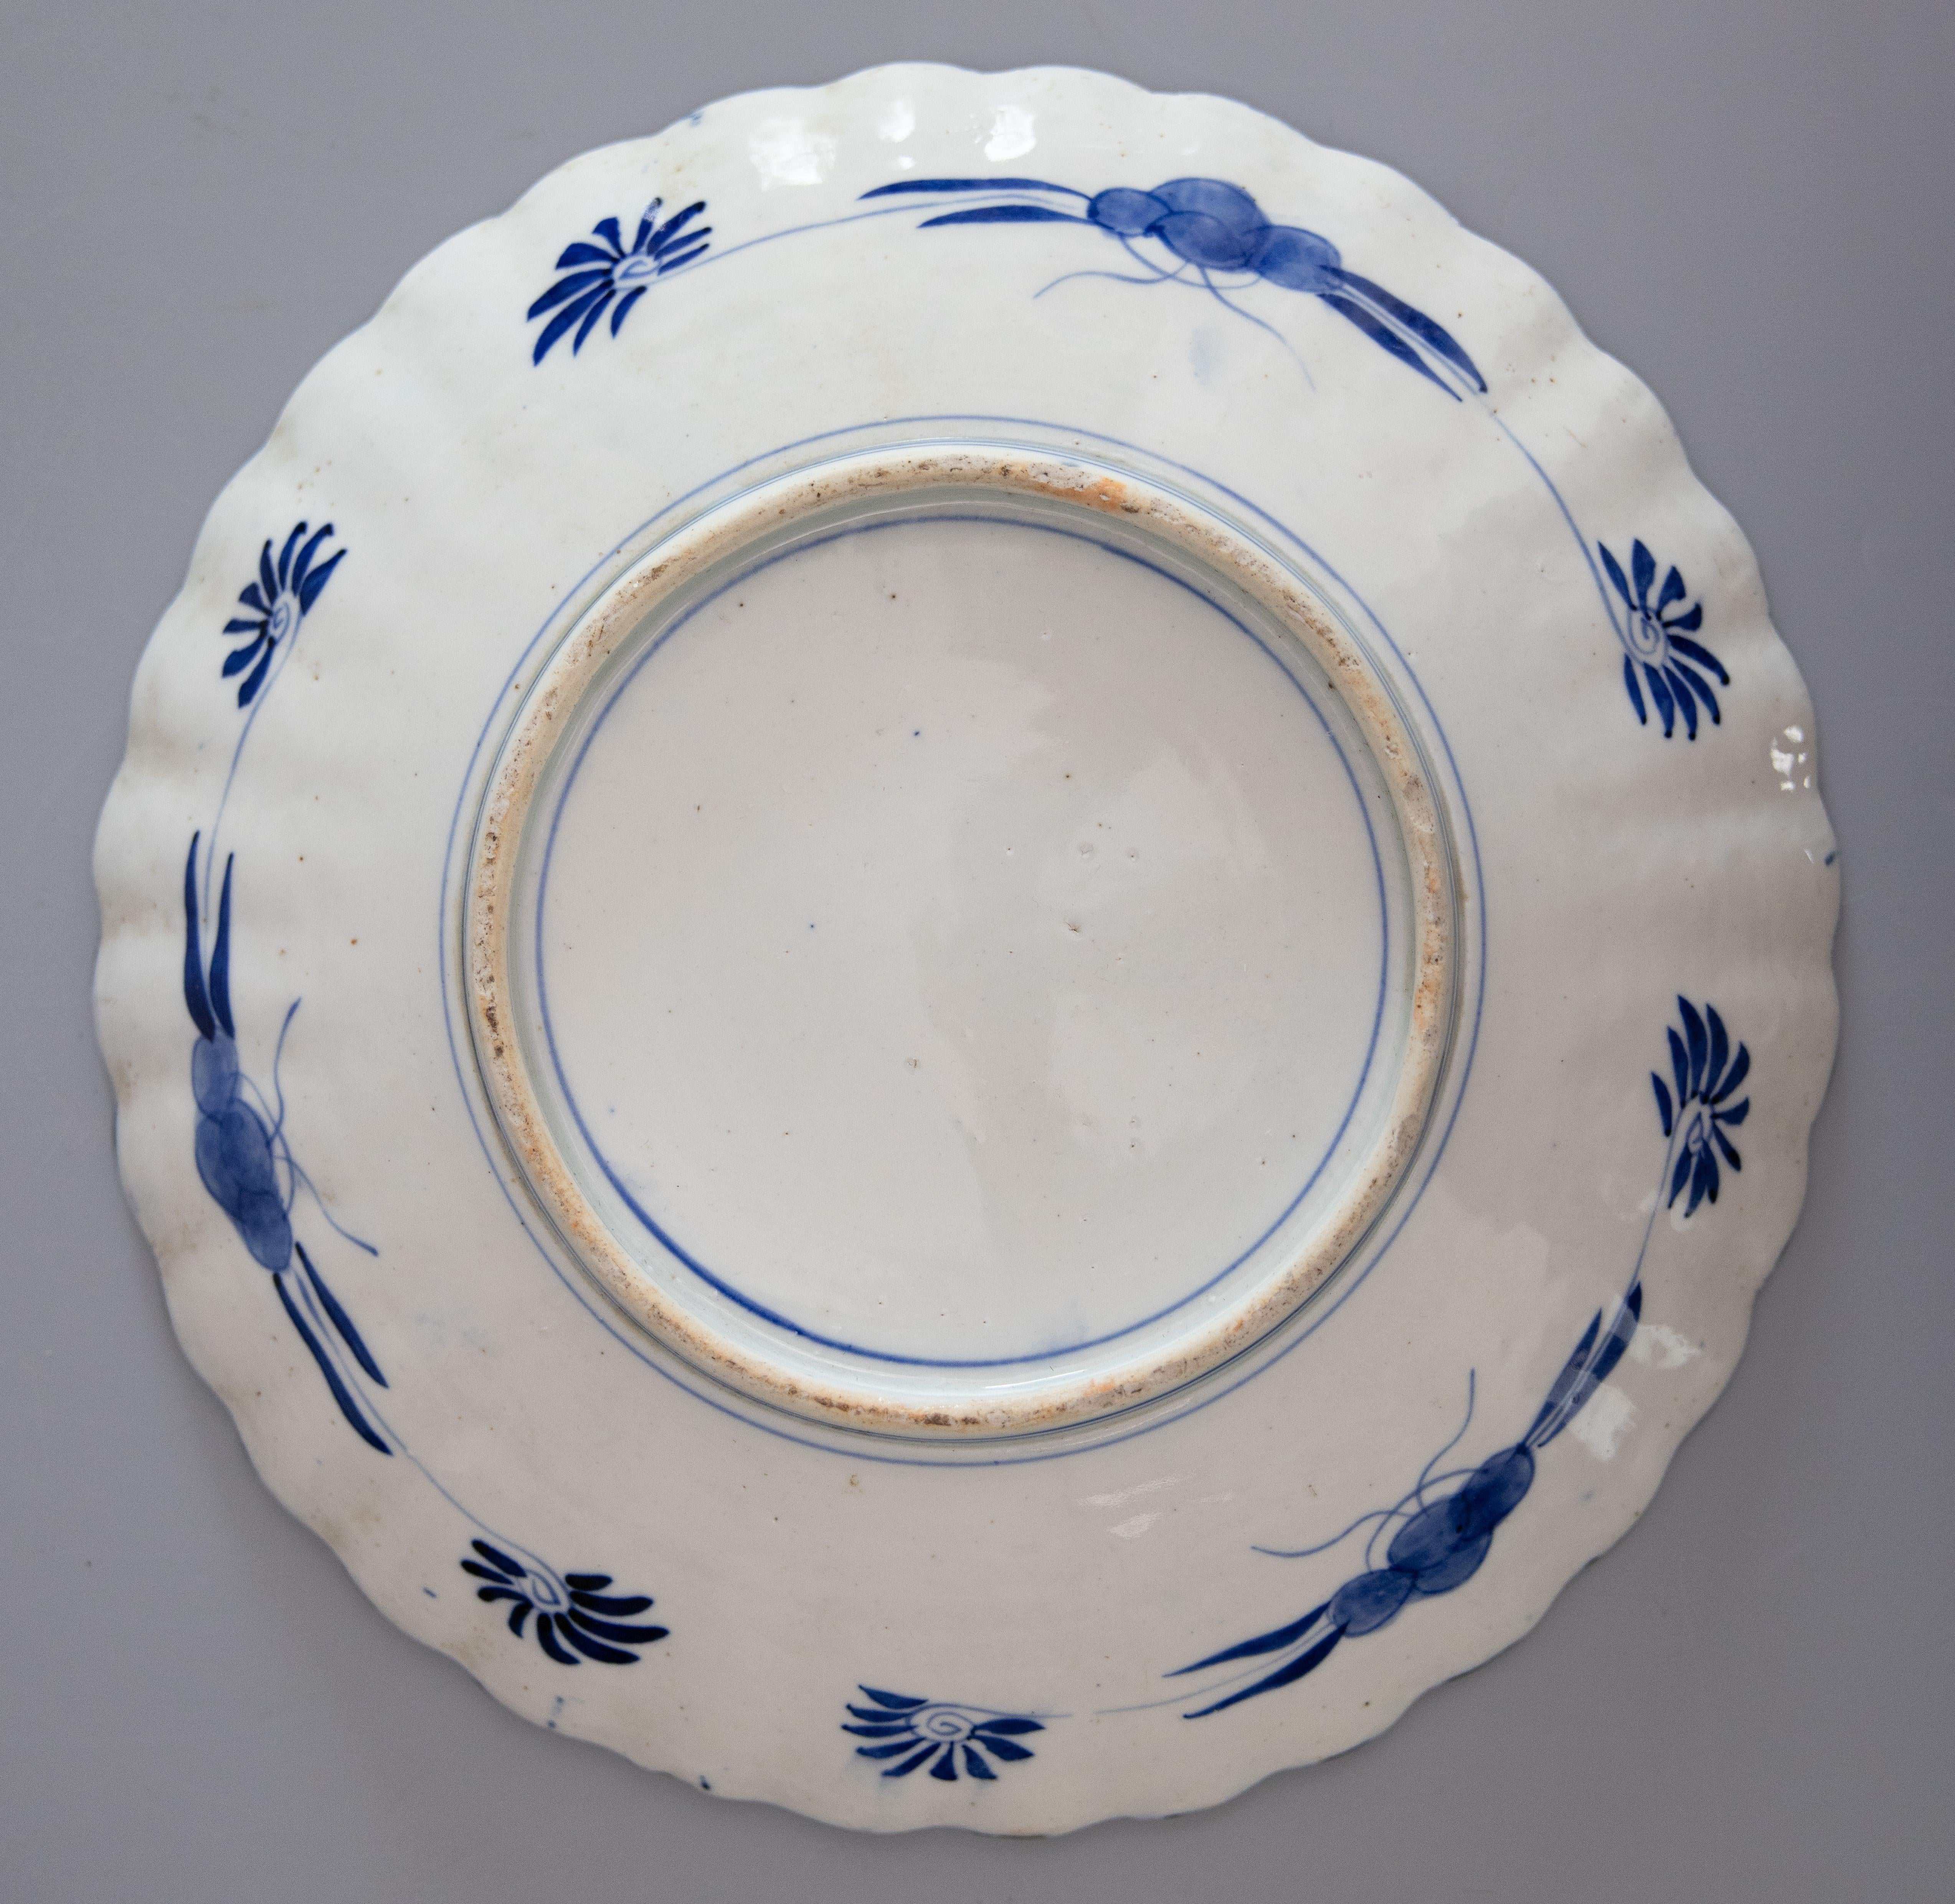 19th Century Japanese Imari Scalloped Charger Plate In Good Condition For Sale In Pearland, TX